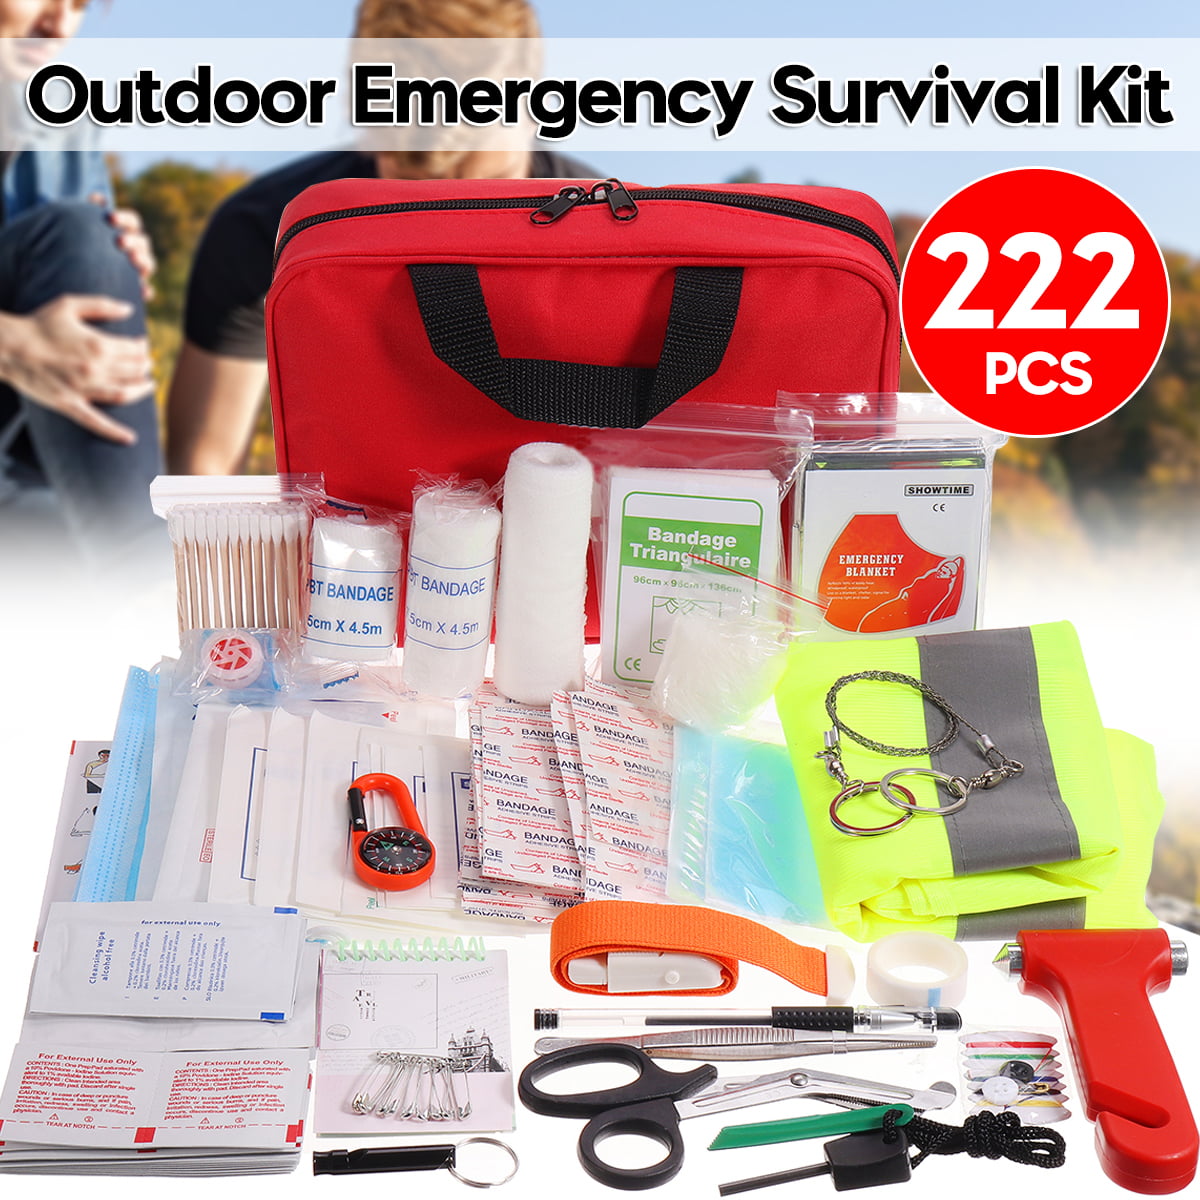 Camping Emergency Survival Kit 50 in 1 Suitable for Camping Hunting Hiking Fishing Camping Climbing All-in-One Professional Survival Gear and Equipment Outdoor First Aid Supplies 